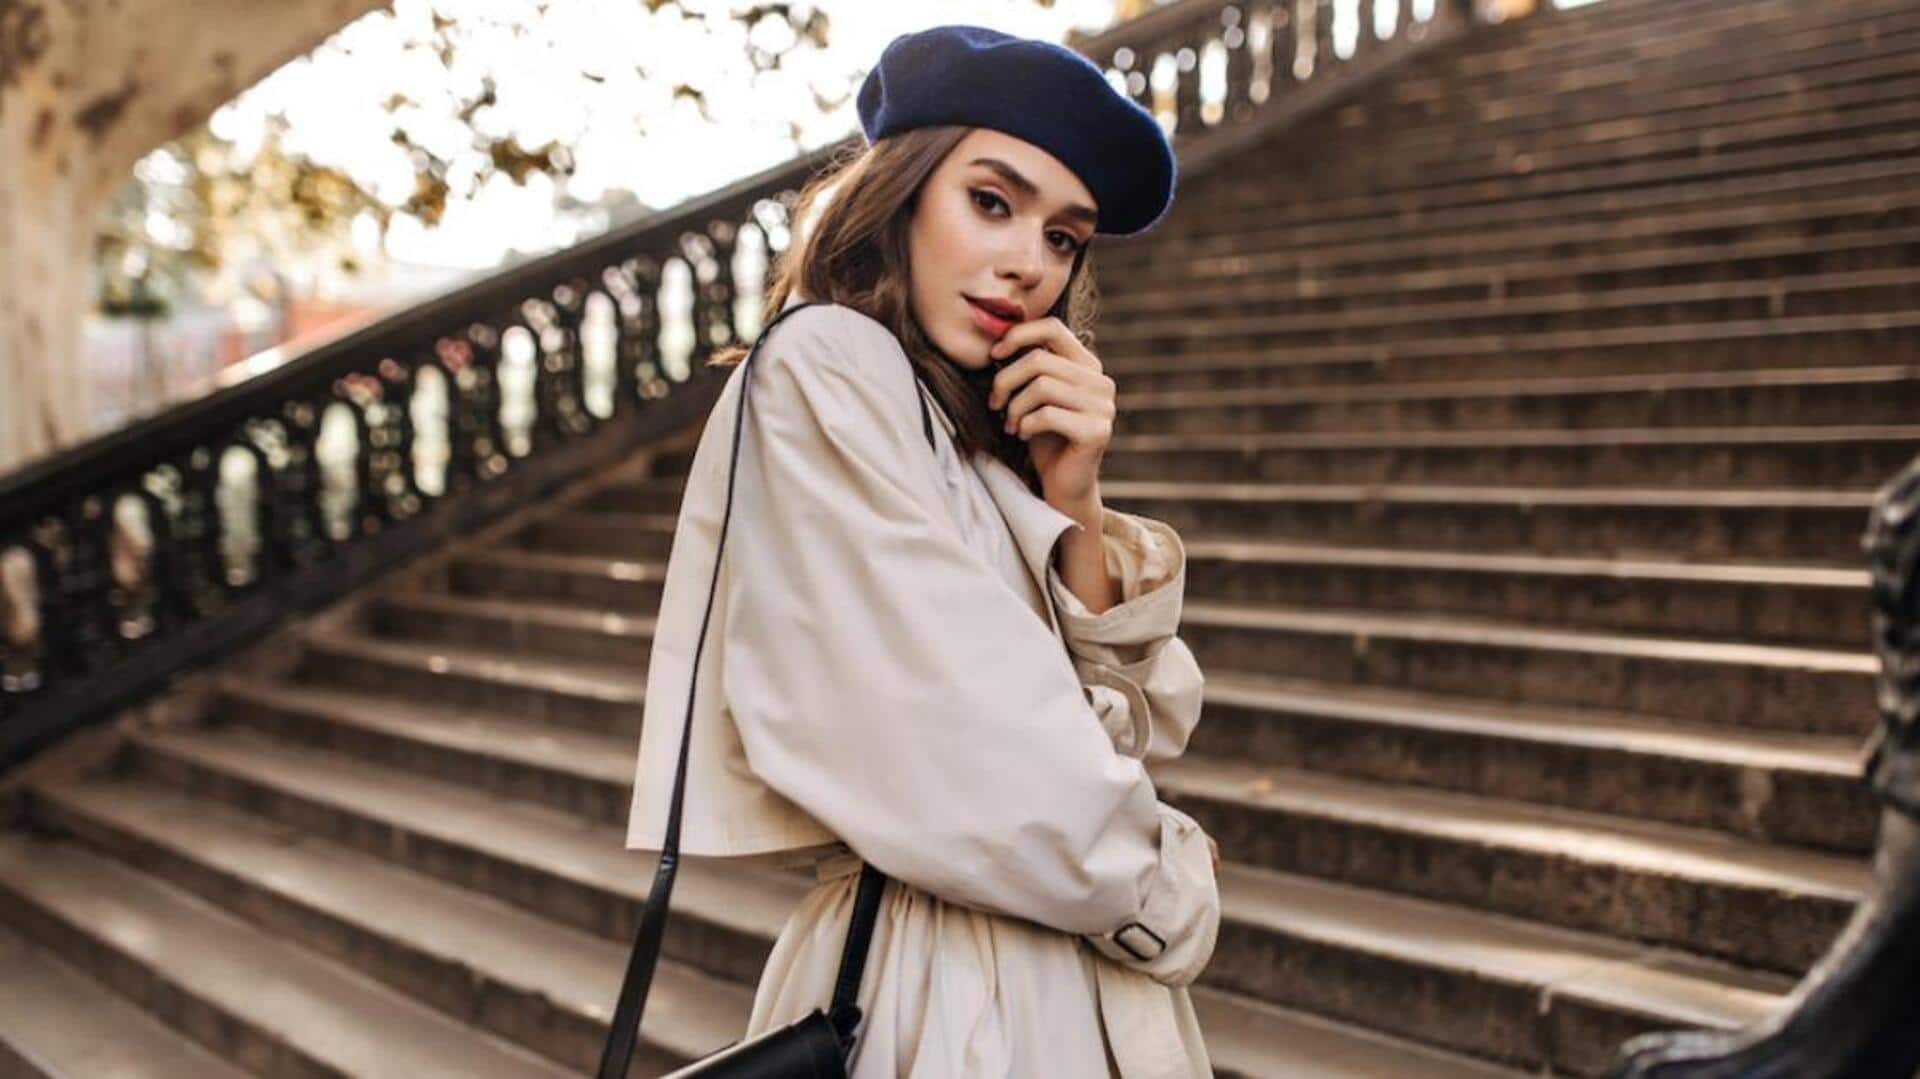 Berets: A timeless accessory that meets modern style